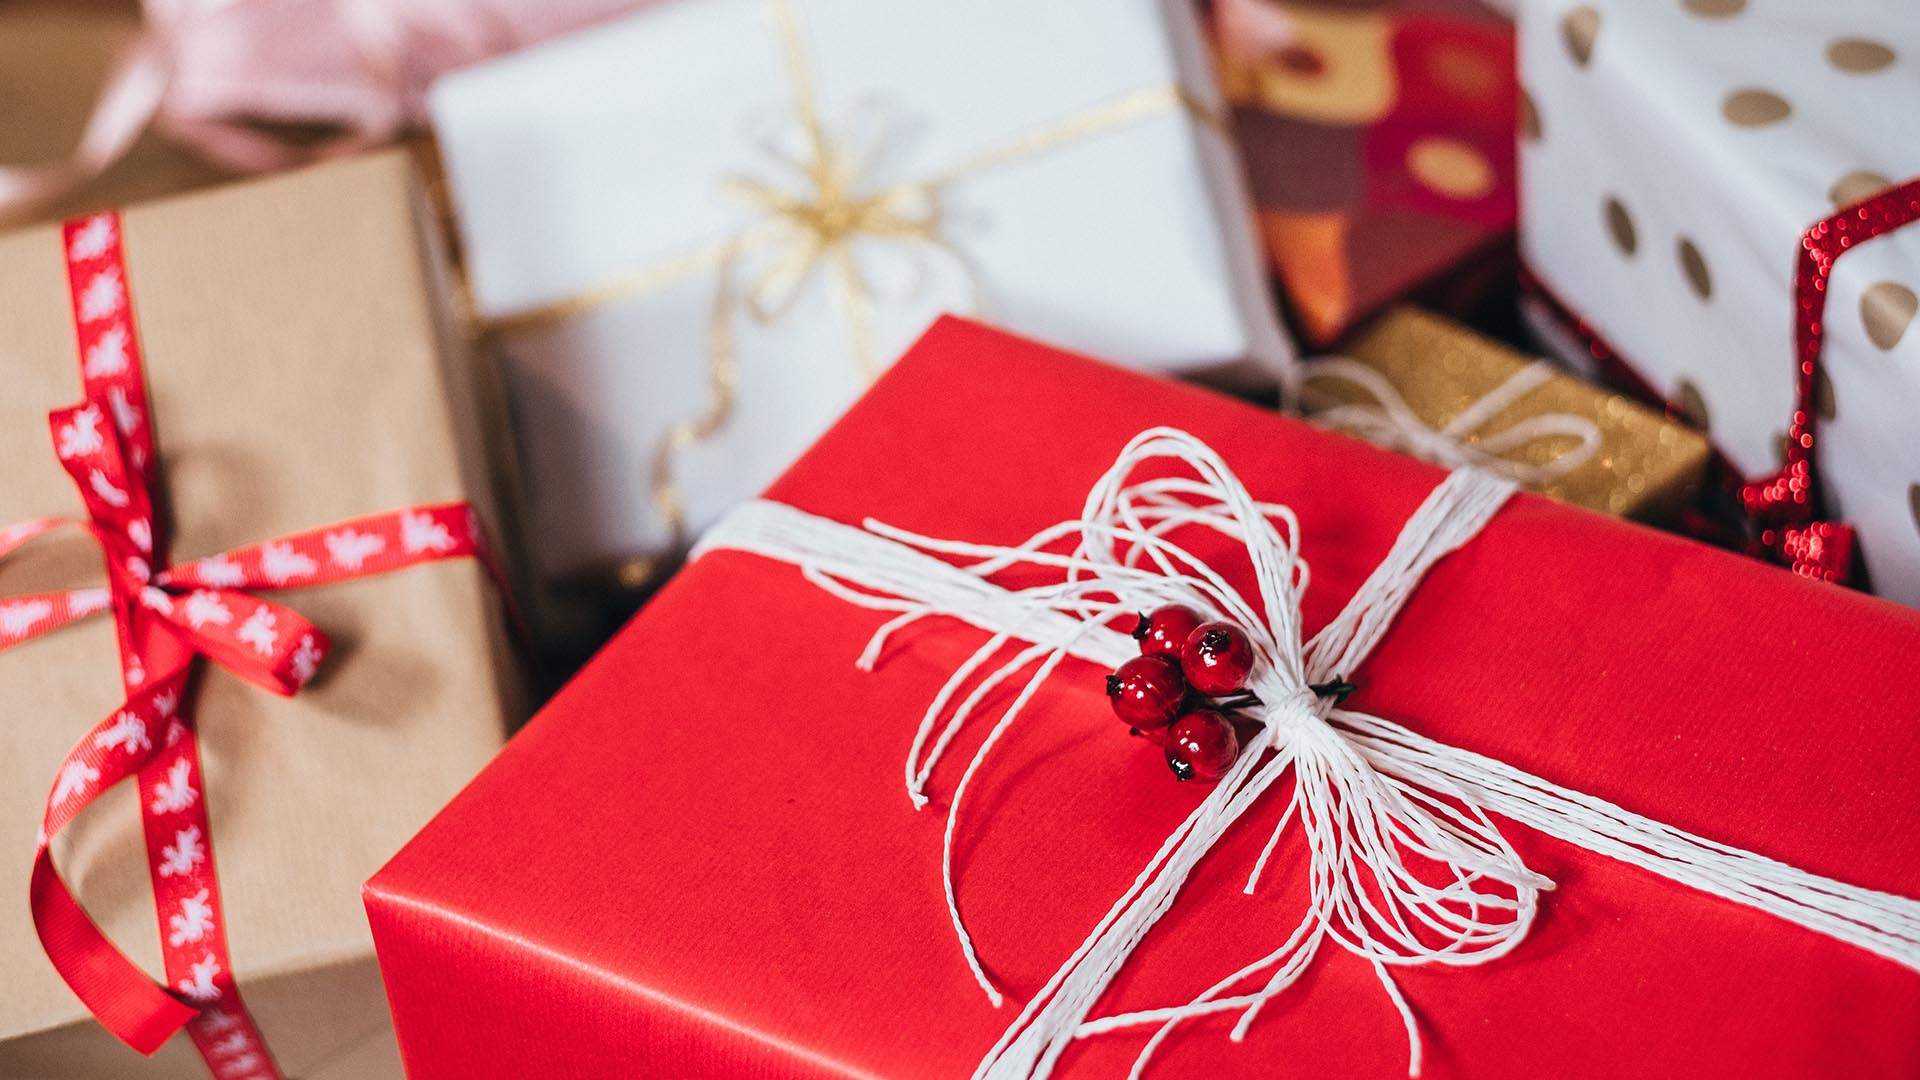 Christmas Gift Ideas for the Hard-to-Shop-For People in Your Life